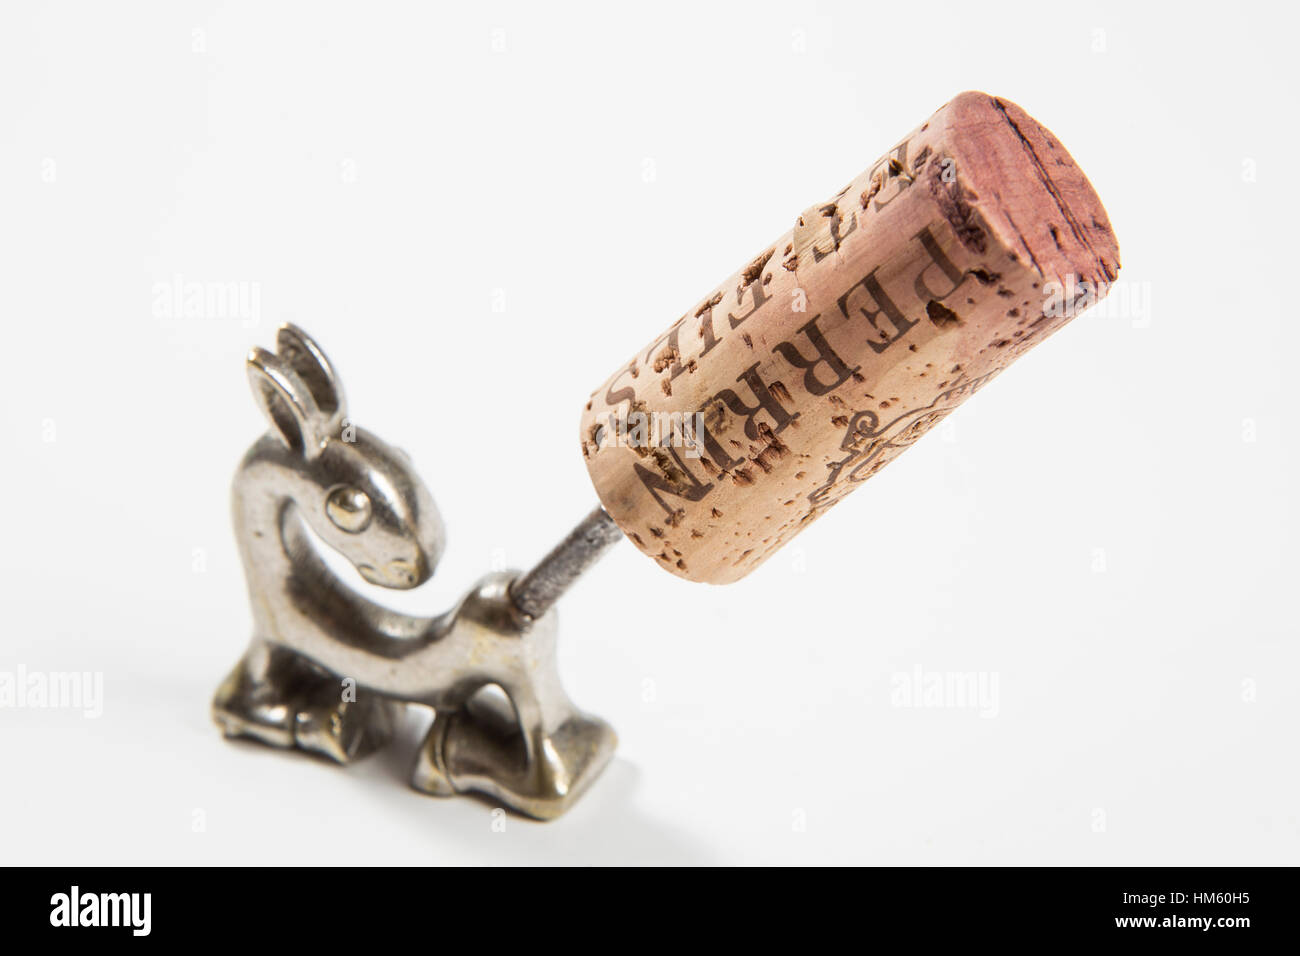 Wine cork with a corkscrew inserted Stock Photo